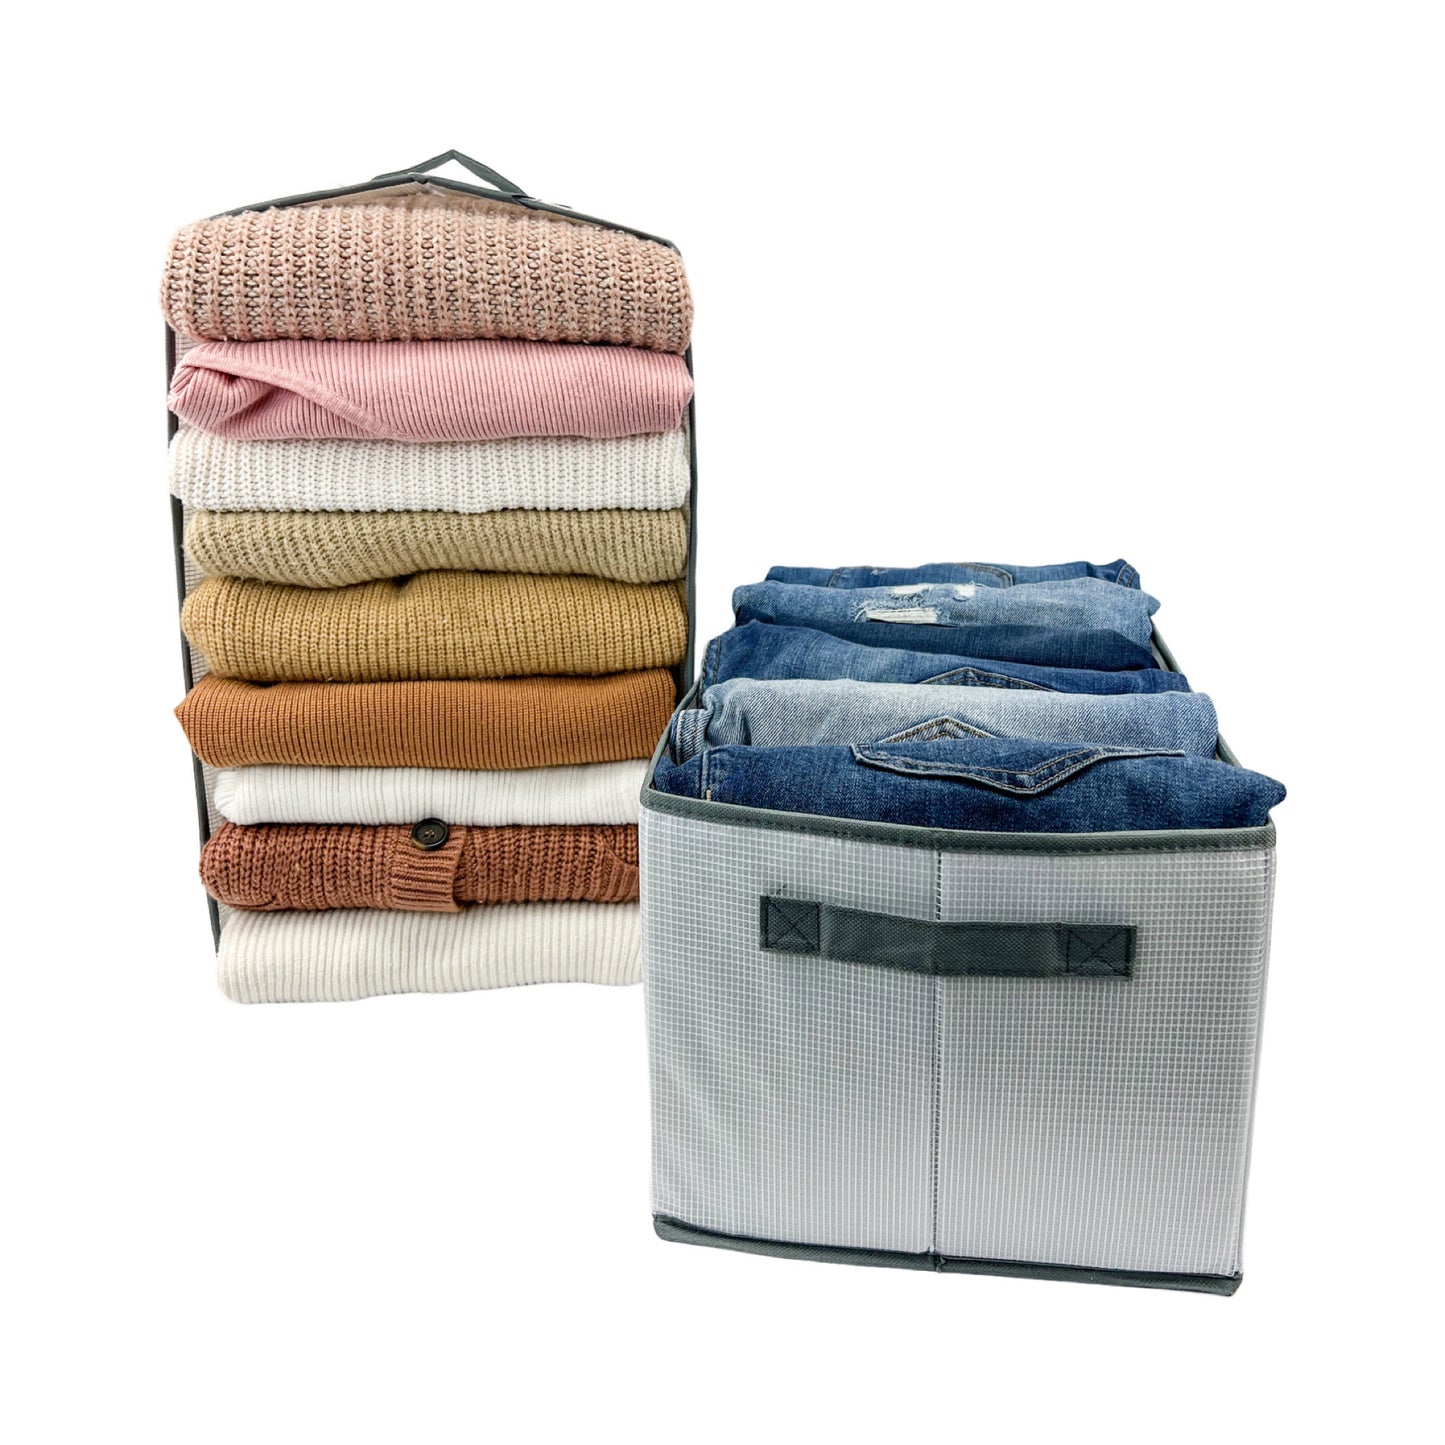 A clothes organizer with various compartments for storage, including drawer dividers and pants hangers, ideal for closet organization. This storage box neatly arranges folded clothes, such as jeans, providing a space-saving solution. Shop now for an efficient closet organizer at an affordable price.